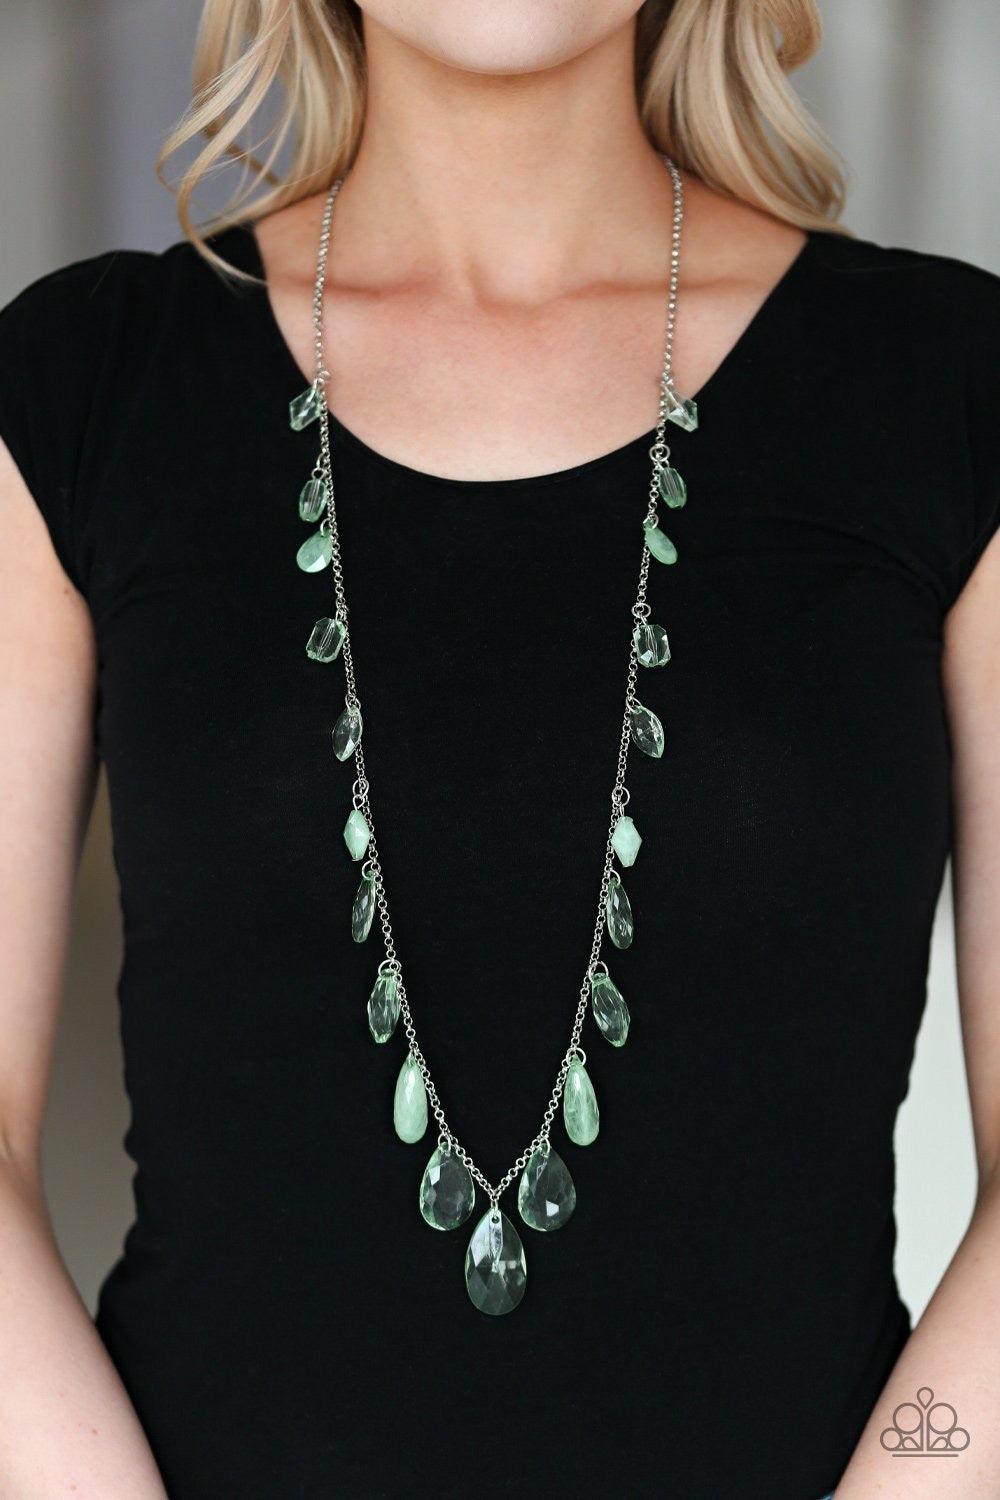 Paparazzi Accessories Glow And Steady Wins The Race - Green A gorgeous collection of glassy and cloudy green crystal-like beads trickle along a shimmery silver chain down the chest in a whimsical fashion. Features an adjustable clasp closure. Jewelry